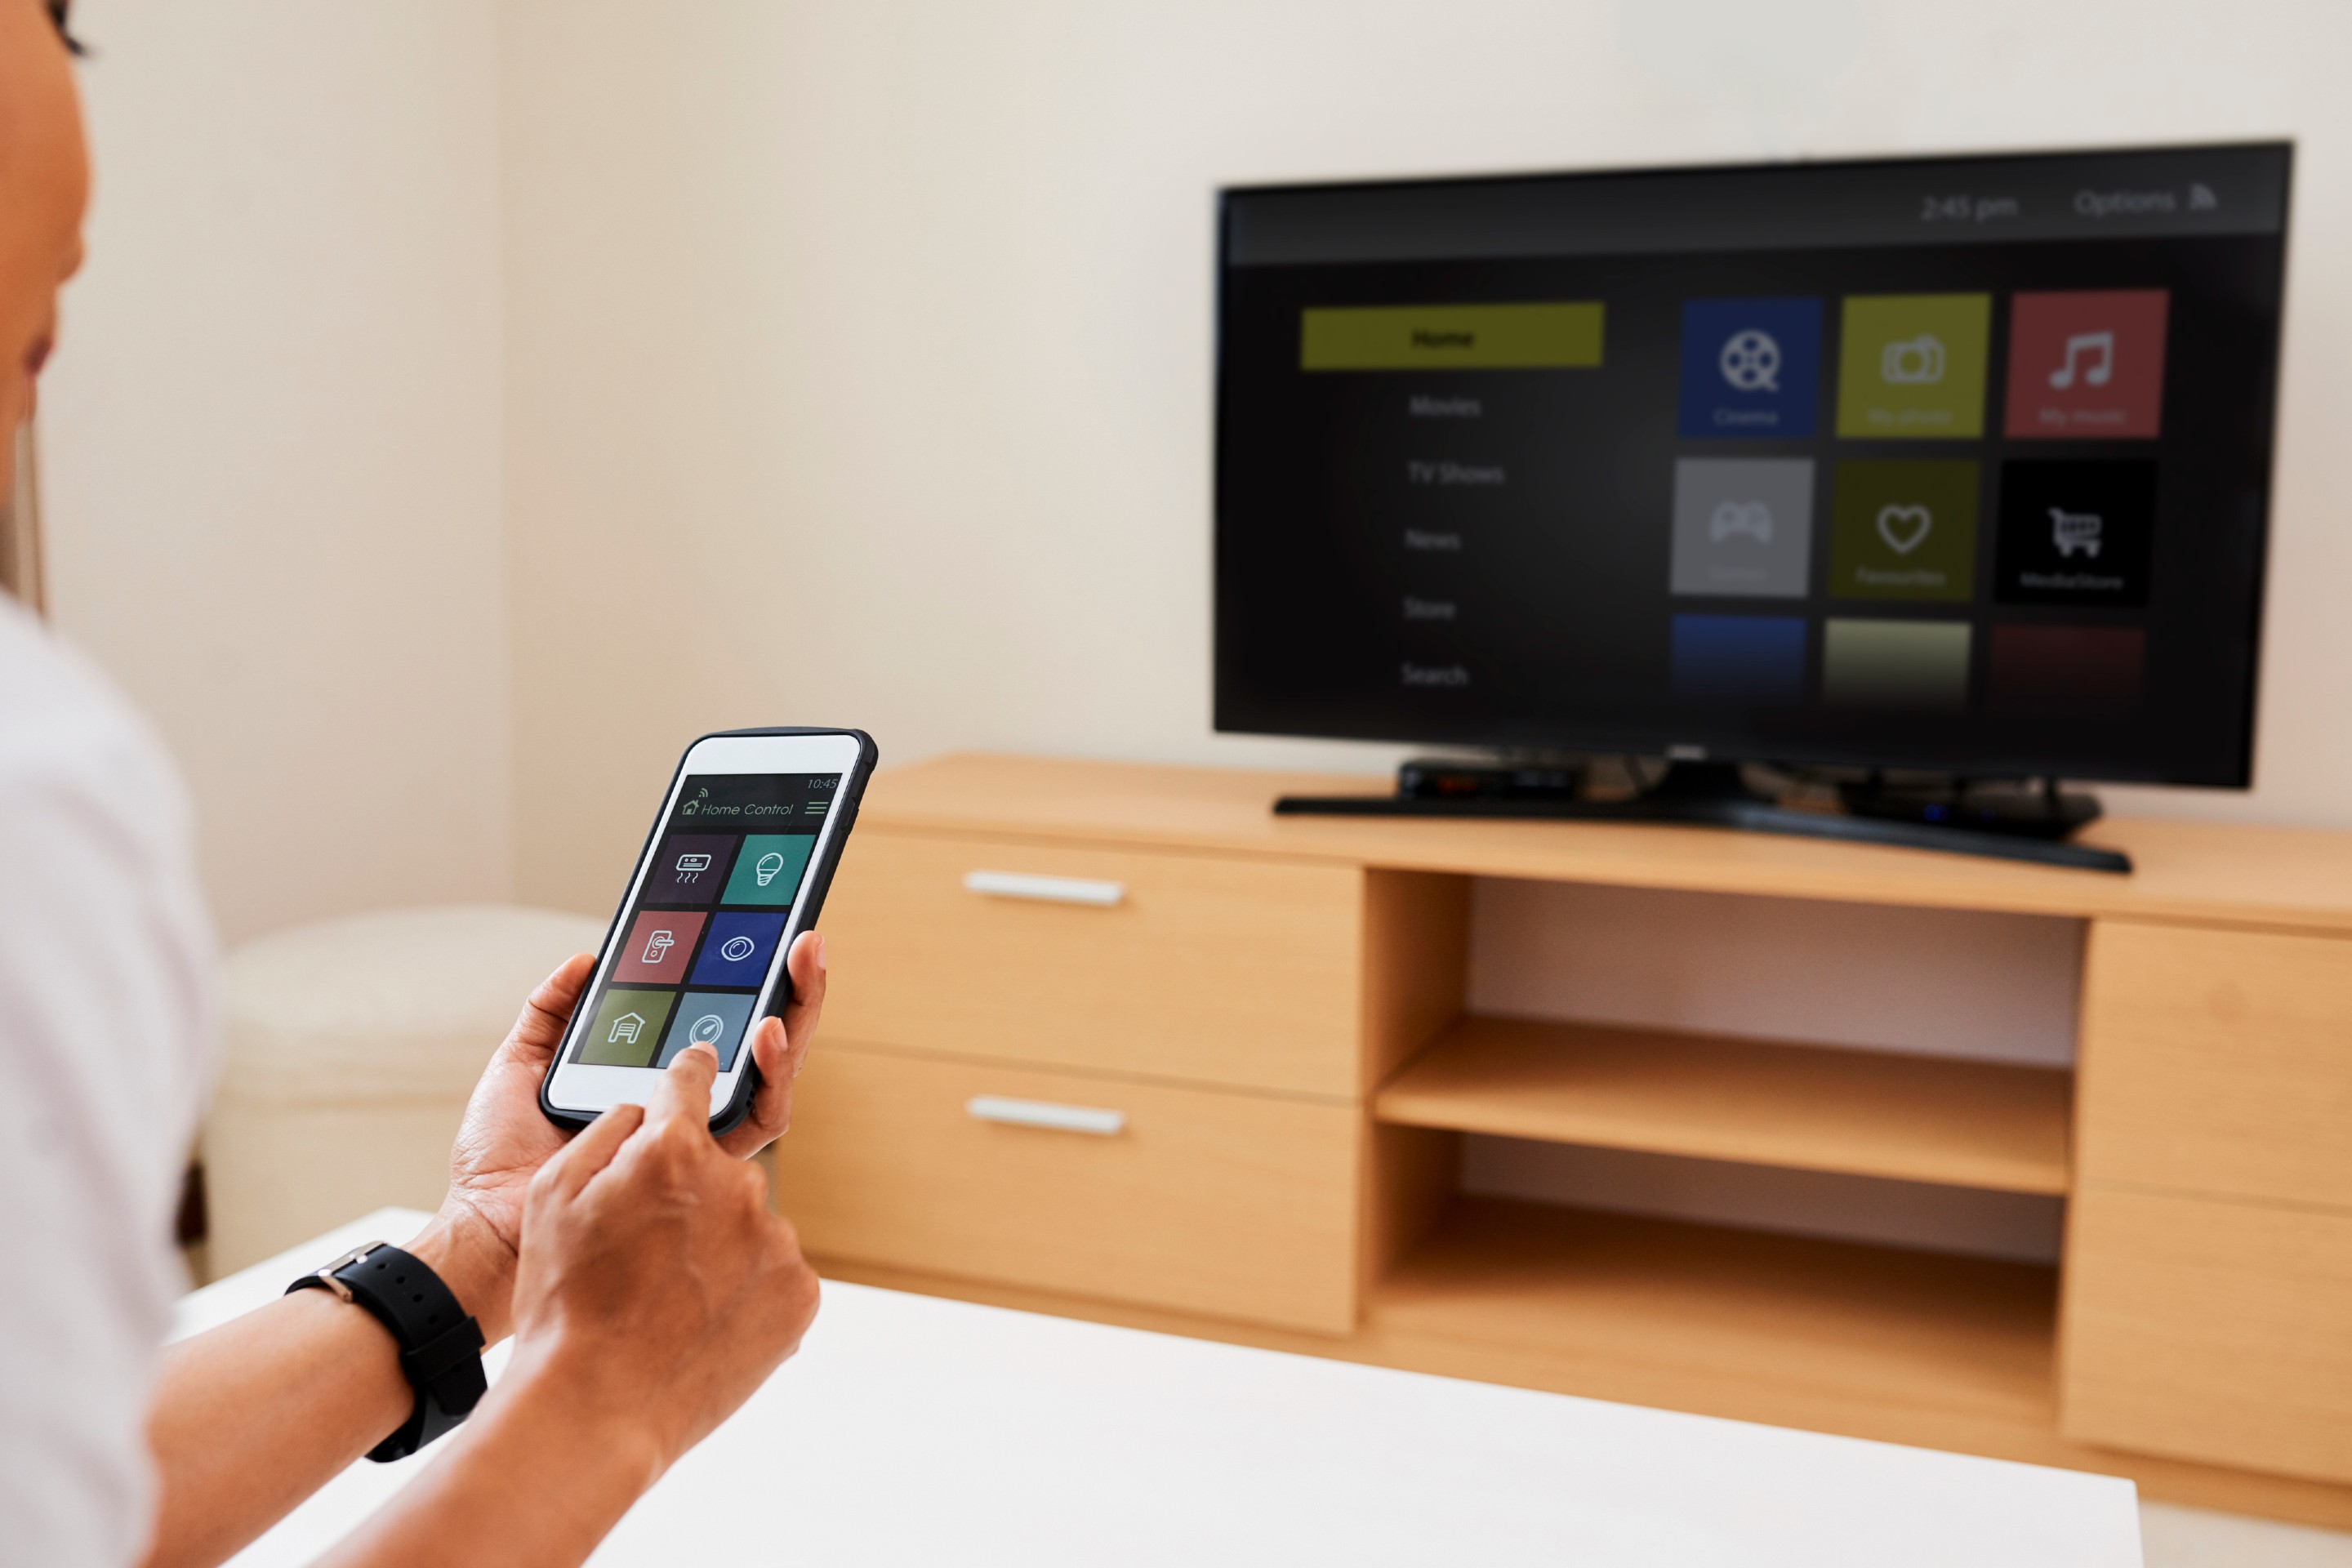 How To Connect a Phone to a Smart TV in 4 Steps